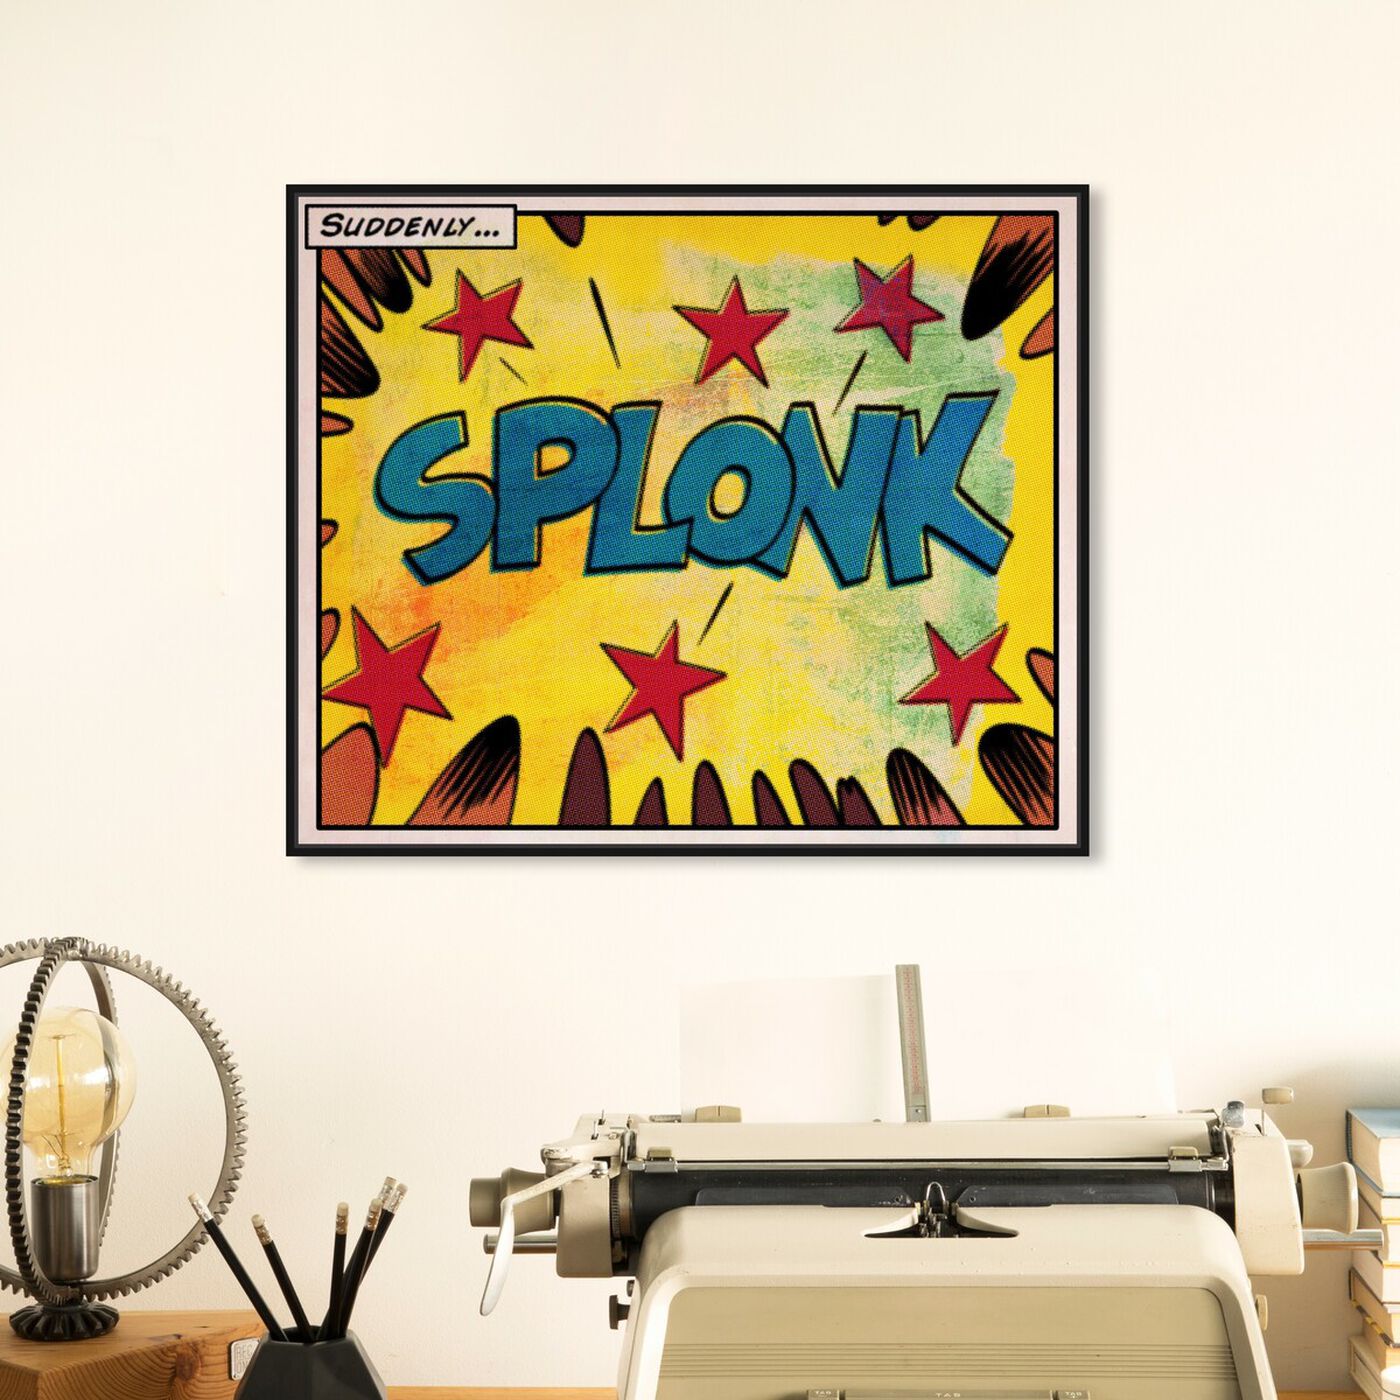 Hanging view of Splonk featuring advertising and comics art.